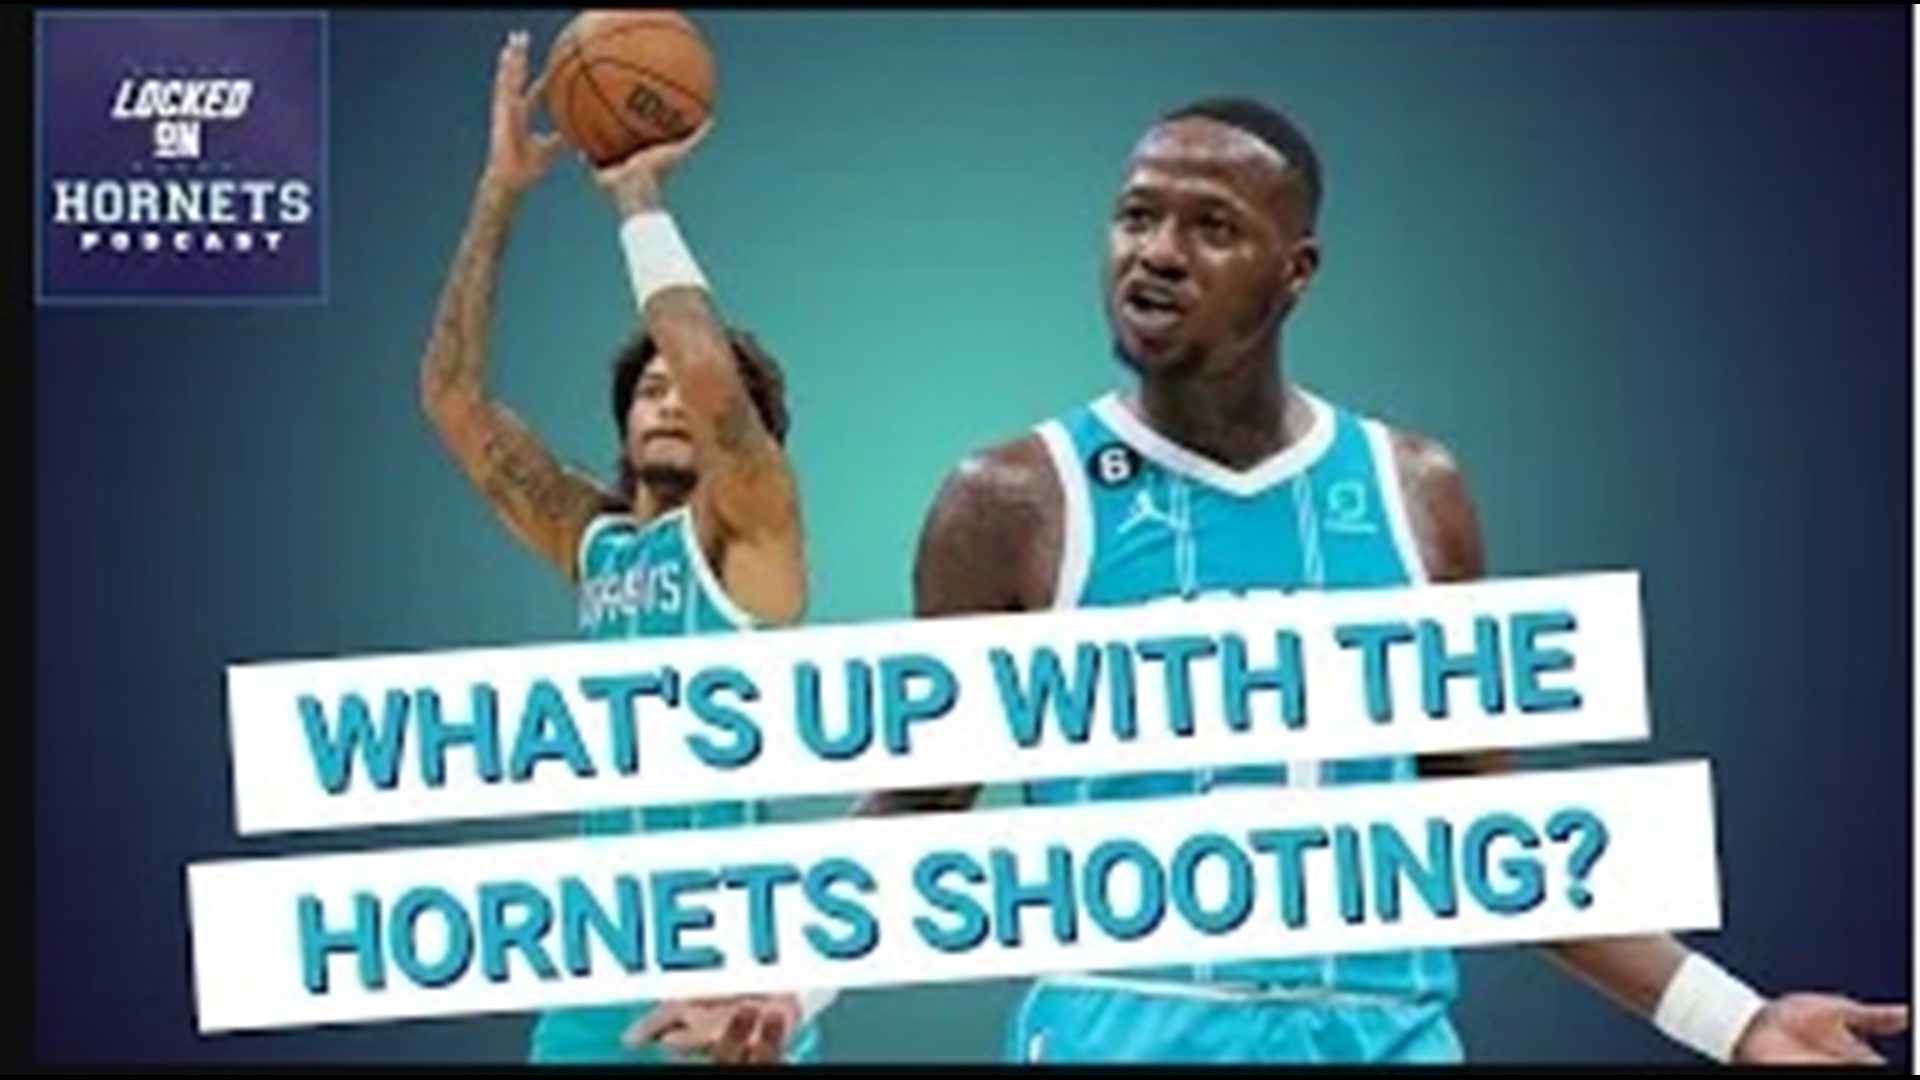 The Charlotte Hornets are in a 5 game losing streak after dropping a winnable game to the Wizards. It's easy to blame injuries, but the issues run deeper than that.